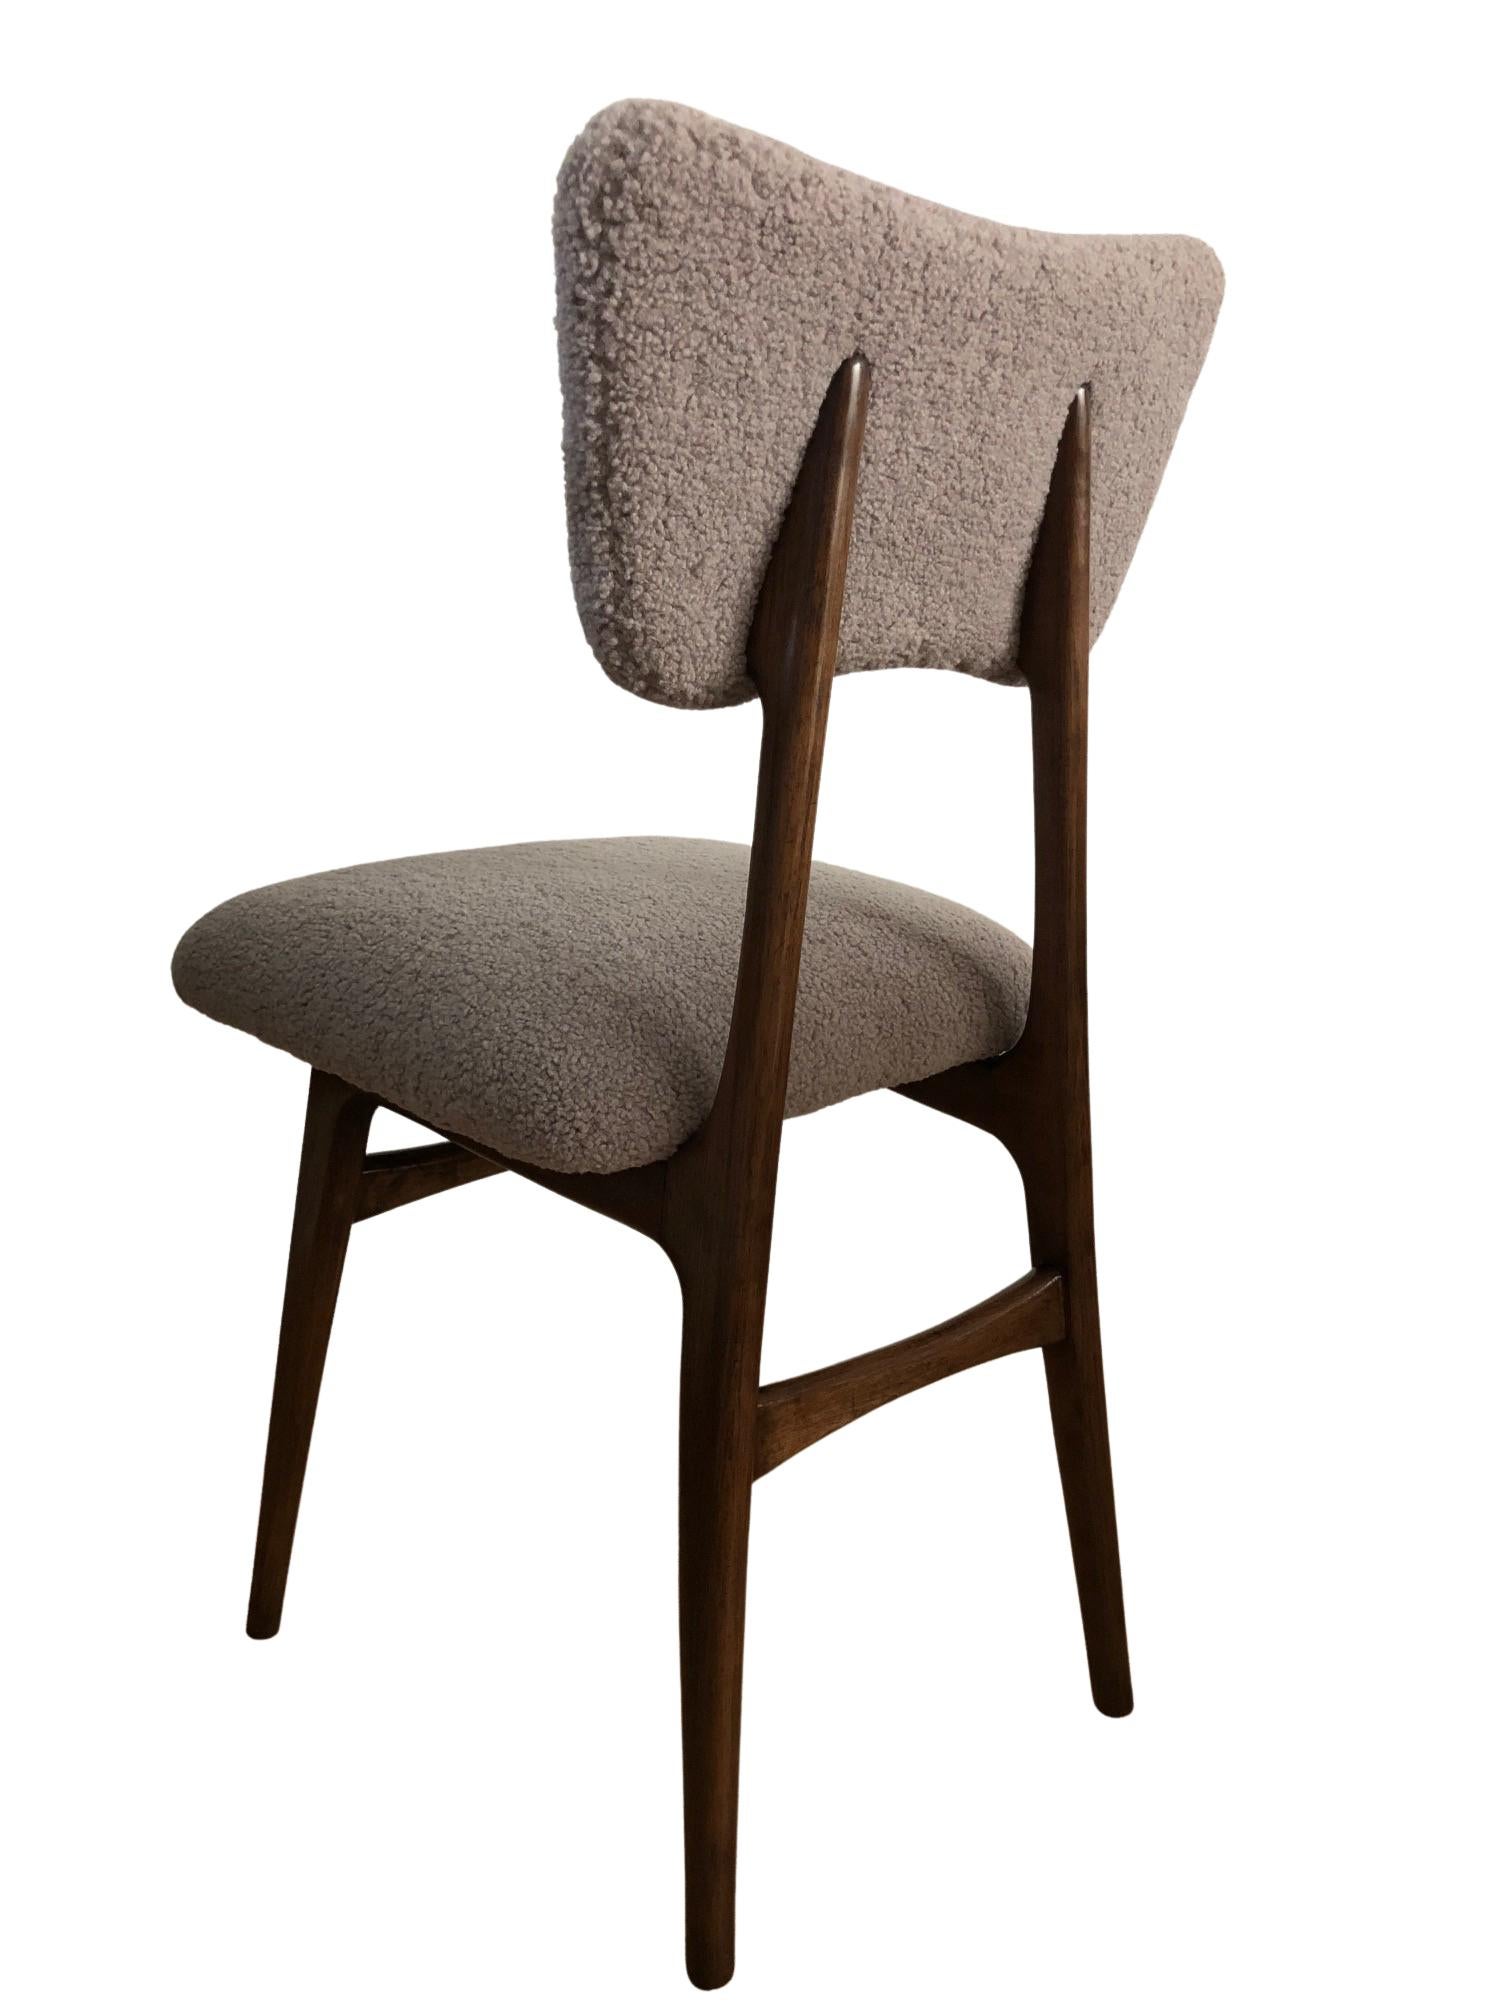 Polish Set of Two Midcentury Beige Bouclé Dining Chairs, Europe, 1960s For Sale